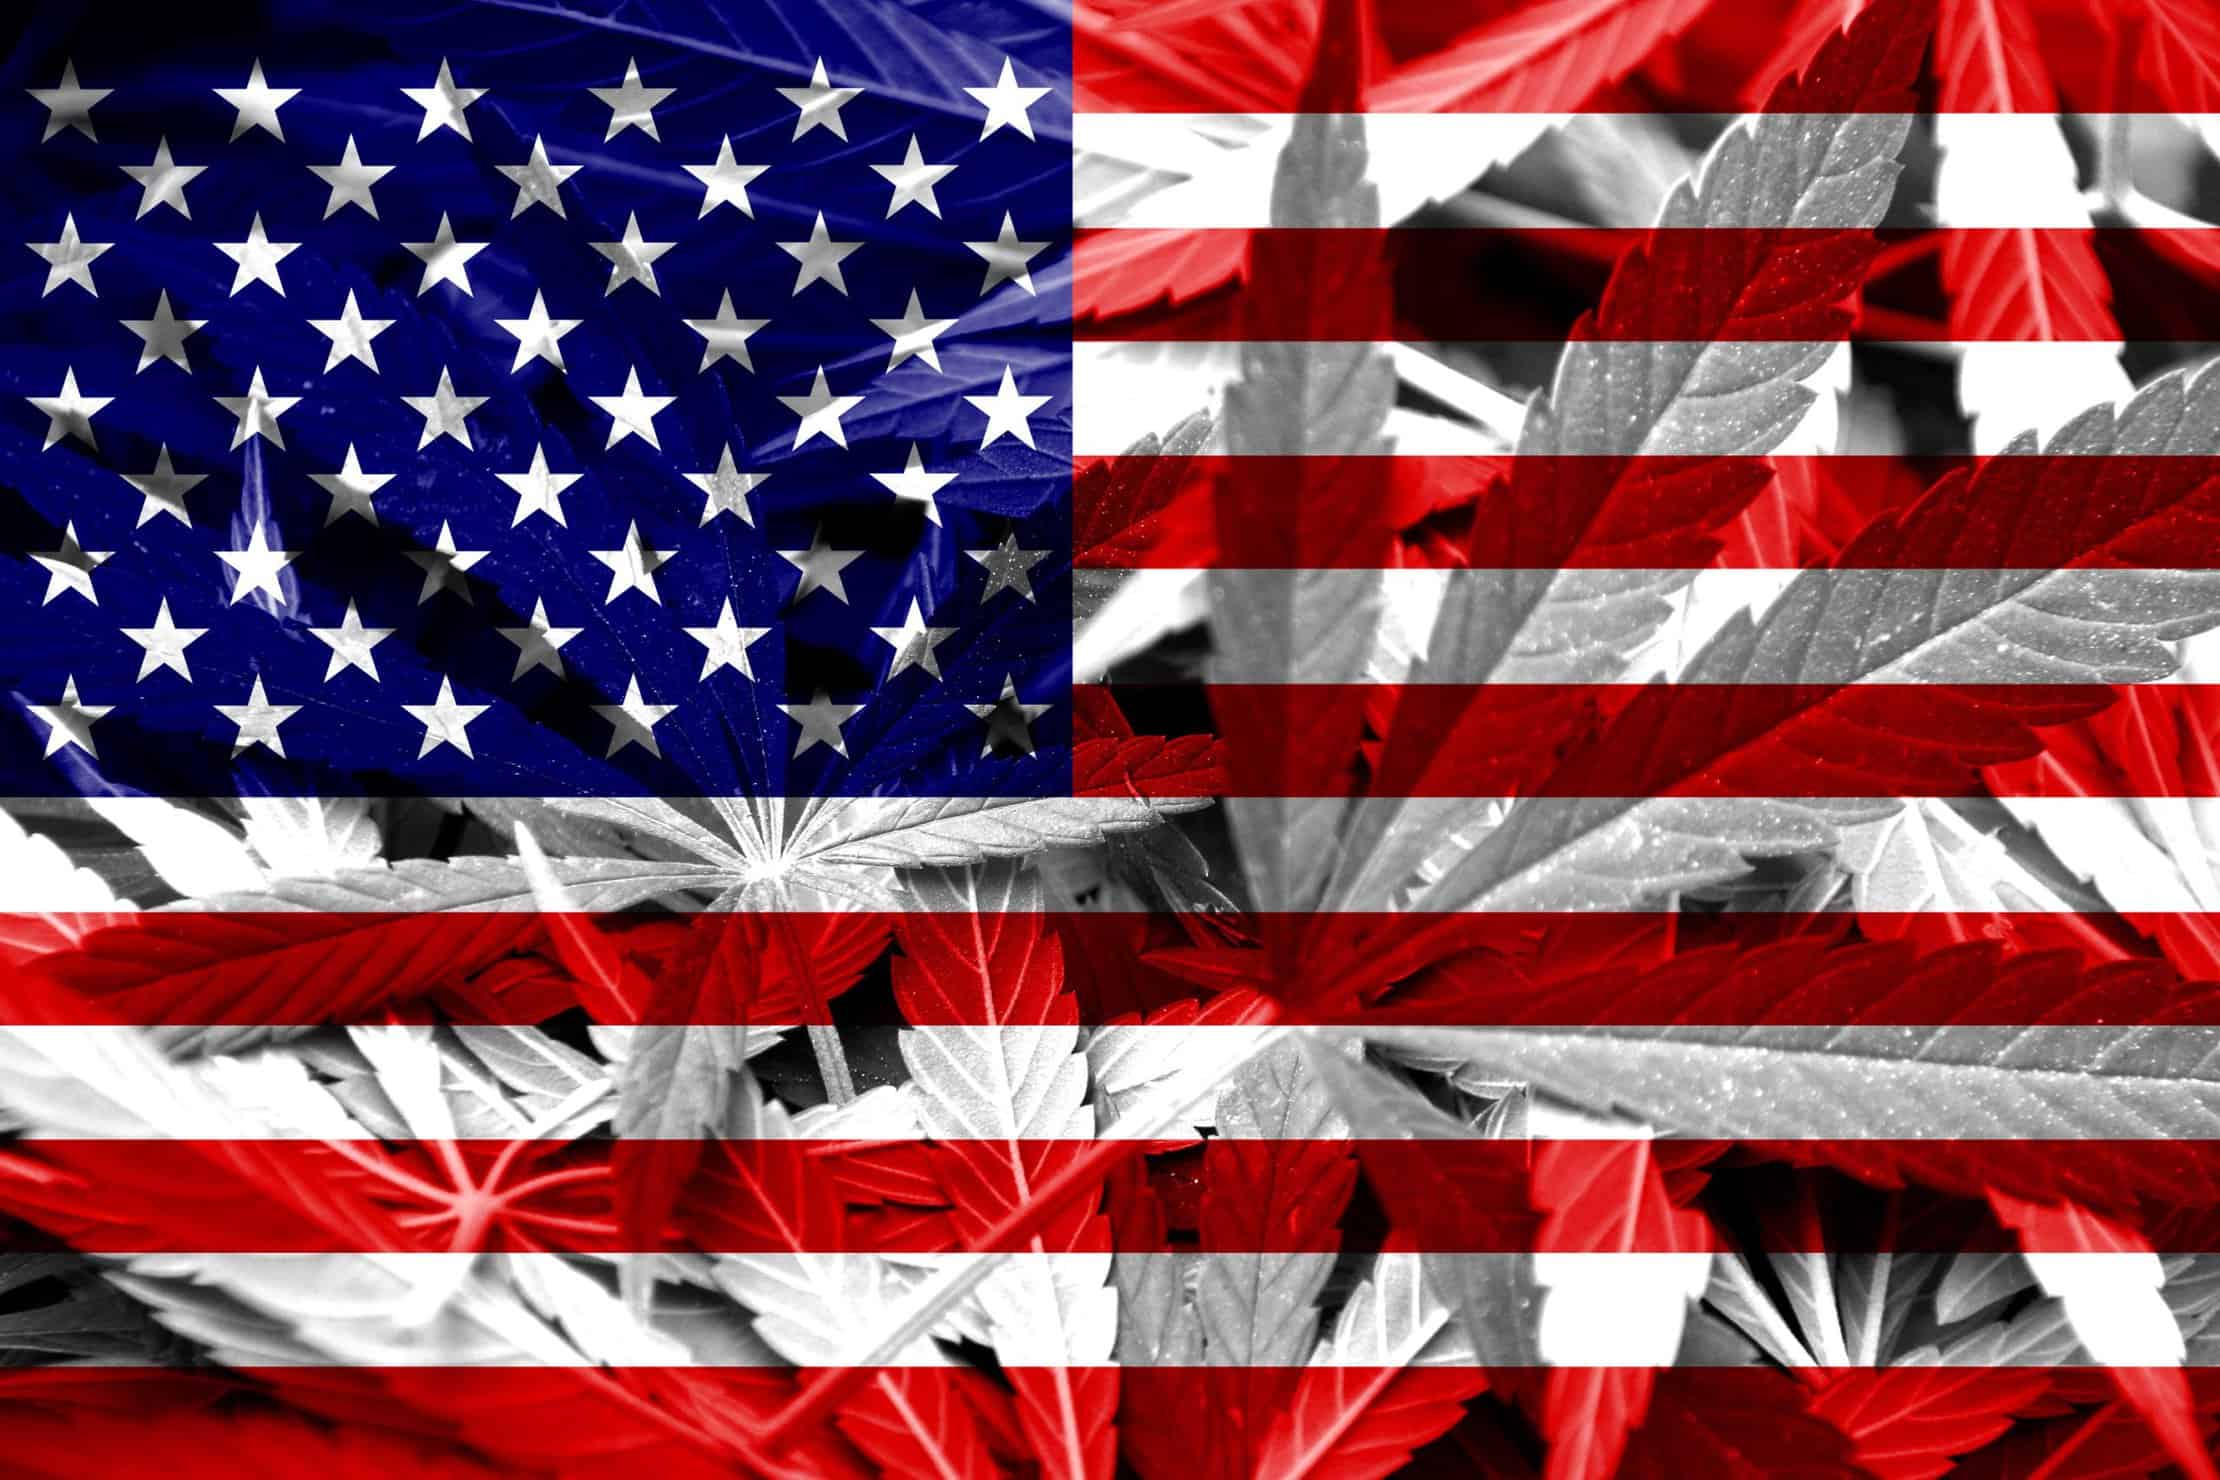 An Argument For Full Cannabis Legalization By 2021 In The USA